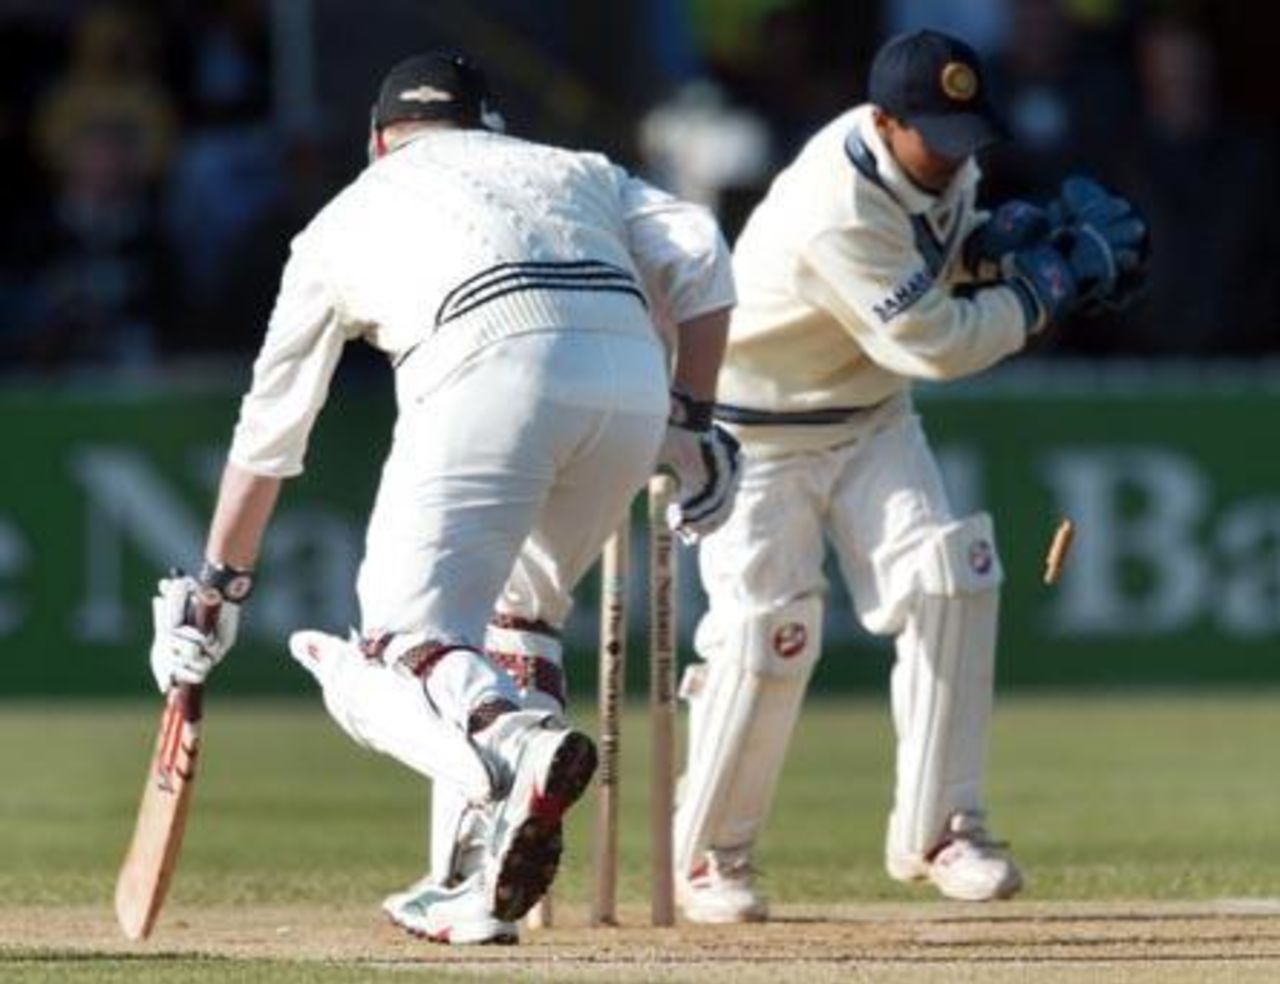 New Zealand batsman Scott Styris fails to get back into his crease in time and is stumped by Indian wicket-keeper Patel, off the bowling of Harbhajan Singh for 0. 1st Test: New Zealand v India at Basin Reserve, Wellington, 12-16 December 2002 (13 December 2002).